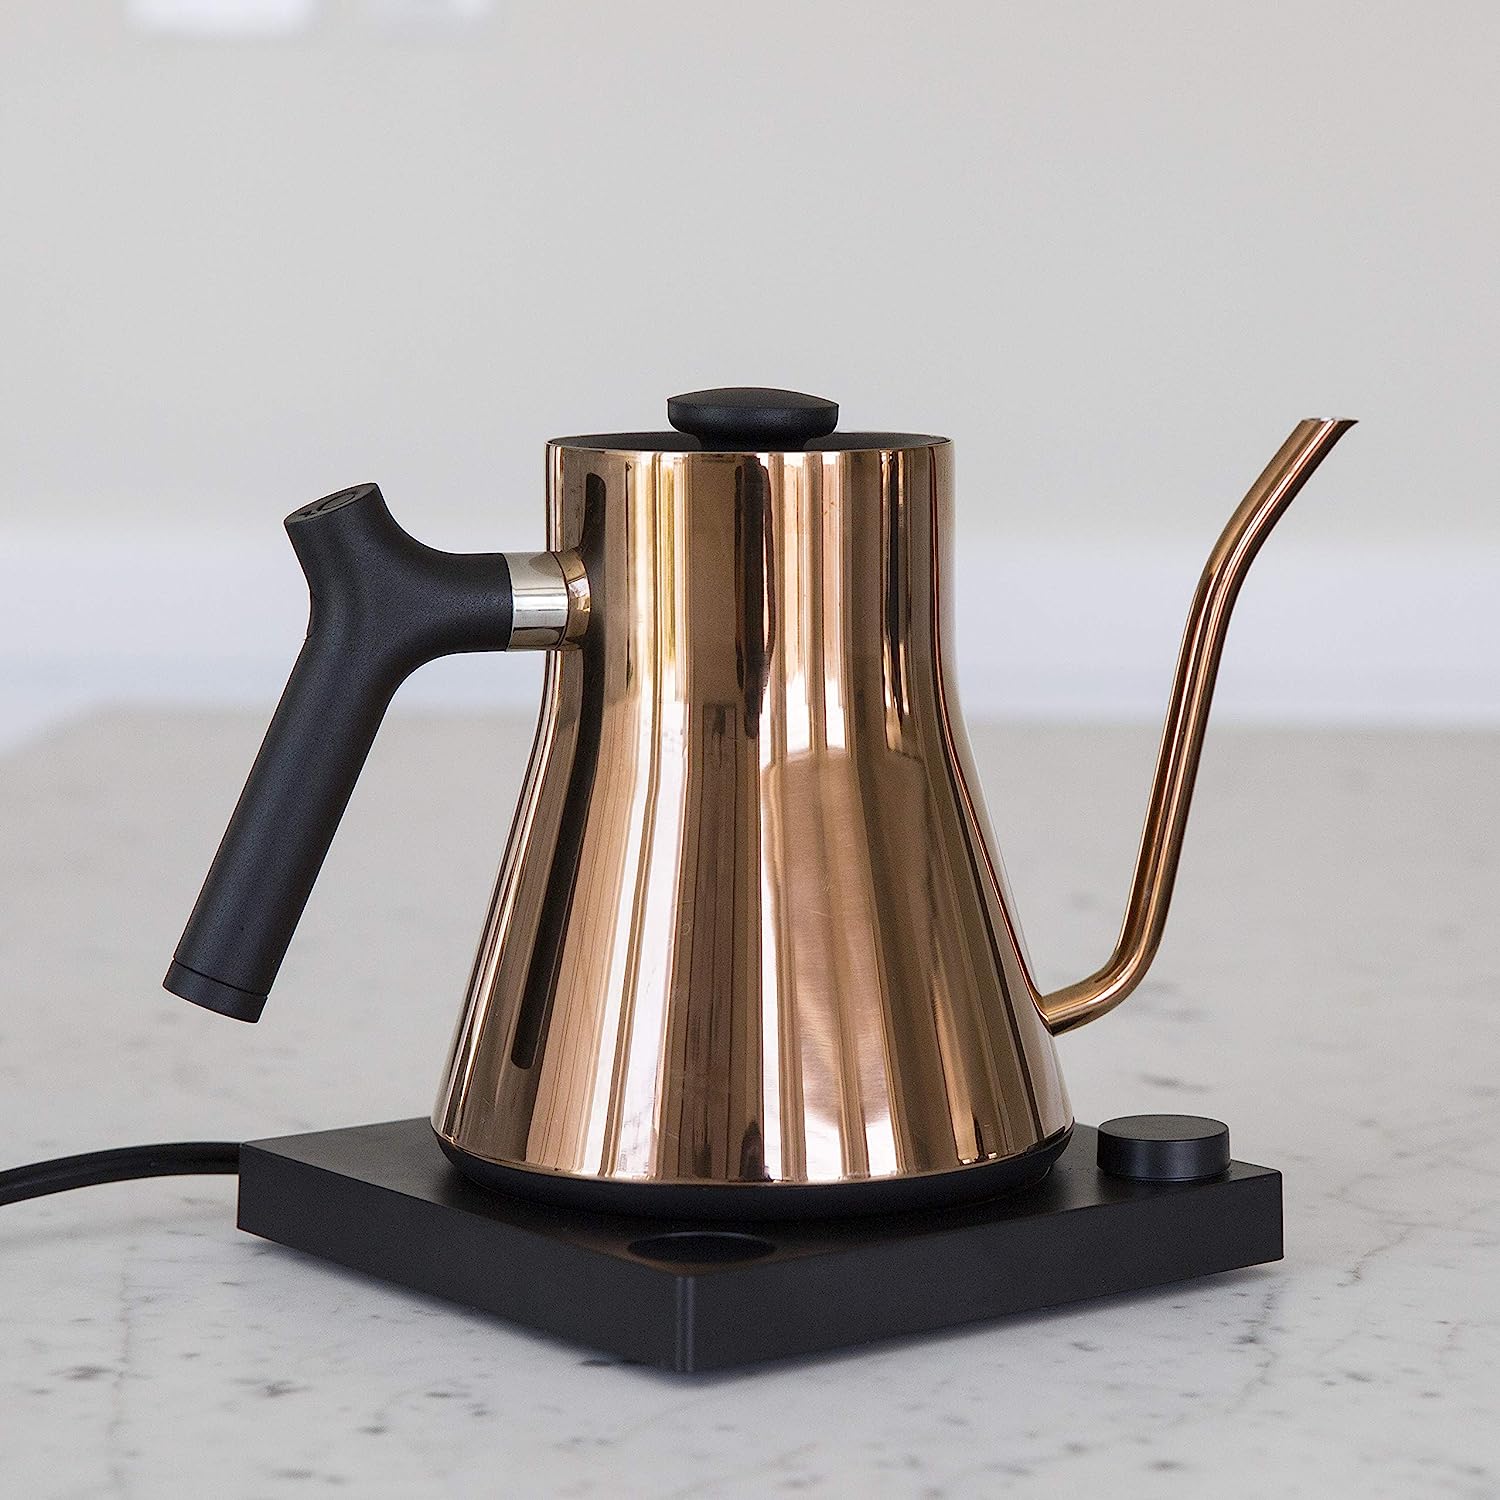 https://bigbigmart.com/wp-content/uploads/2023/07/Fellow-Stagg-EKG-Electric-Gooseneck-Kettle-Pour-Over-Coffee-and-Tea-Kettle-Stainless-Steel-Boiler-Quick-Heating-Electric-Kettles-for-Boiling-Water-Polished-Copper8.jpg